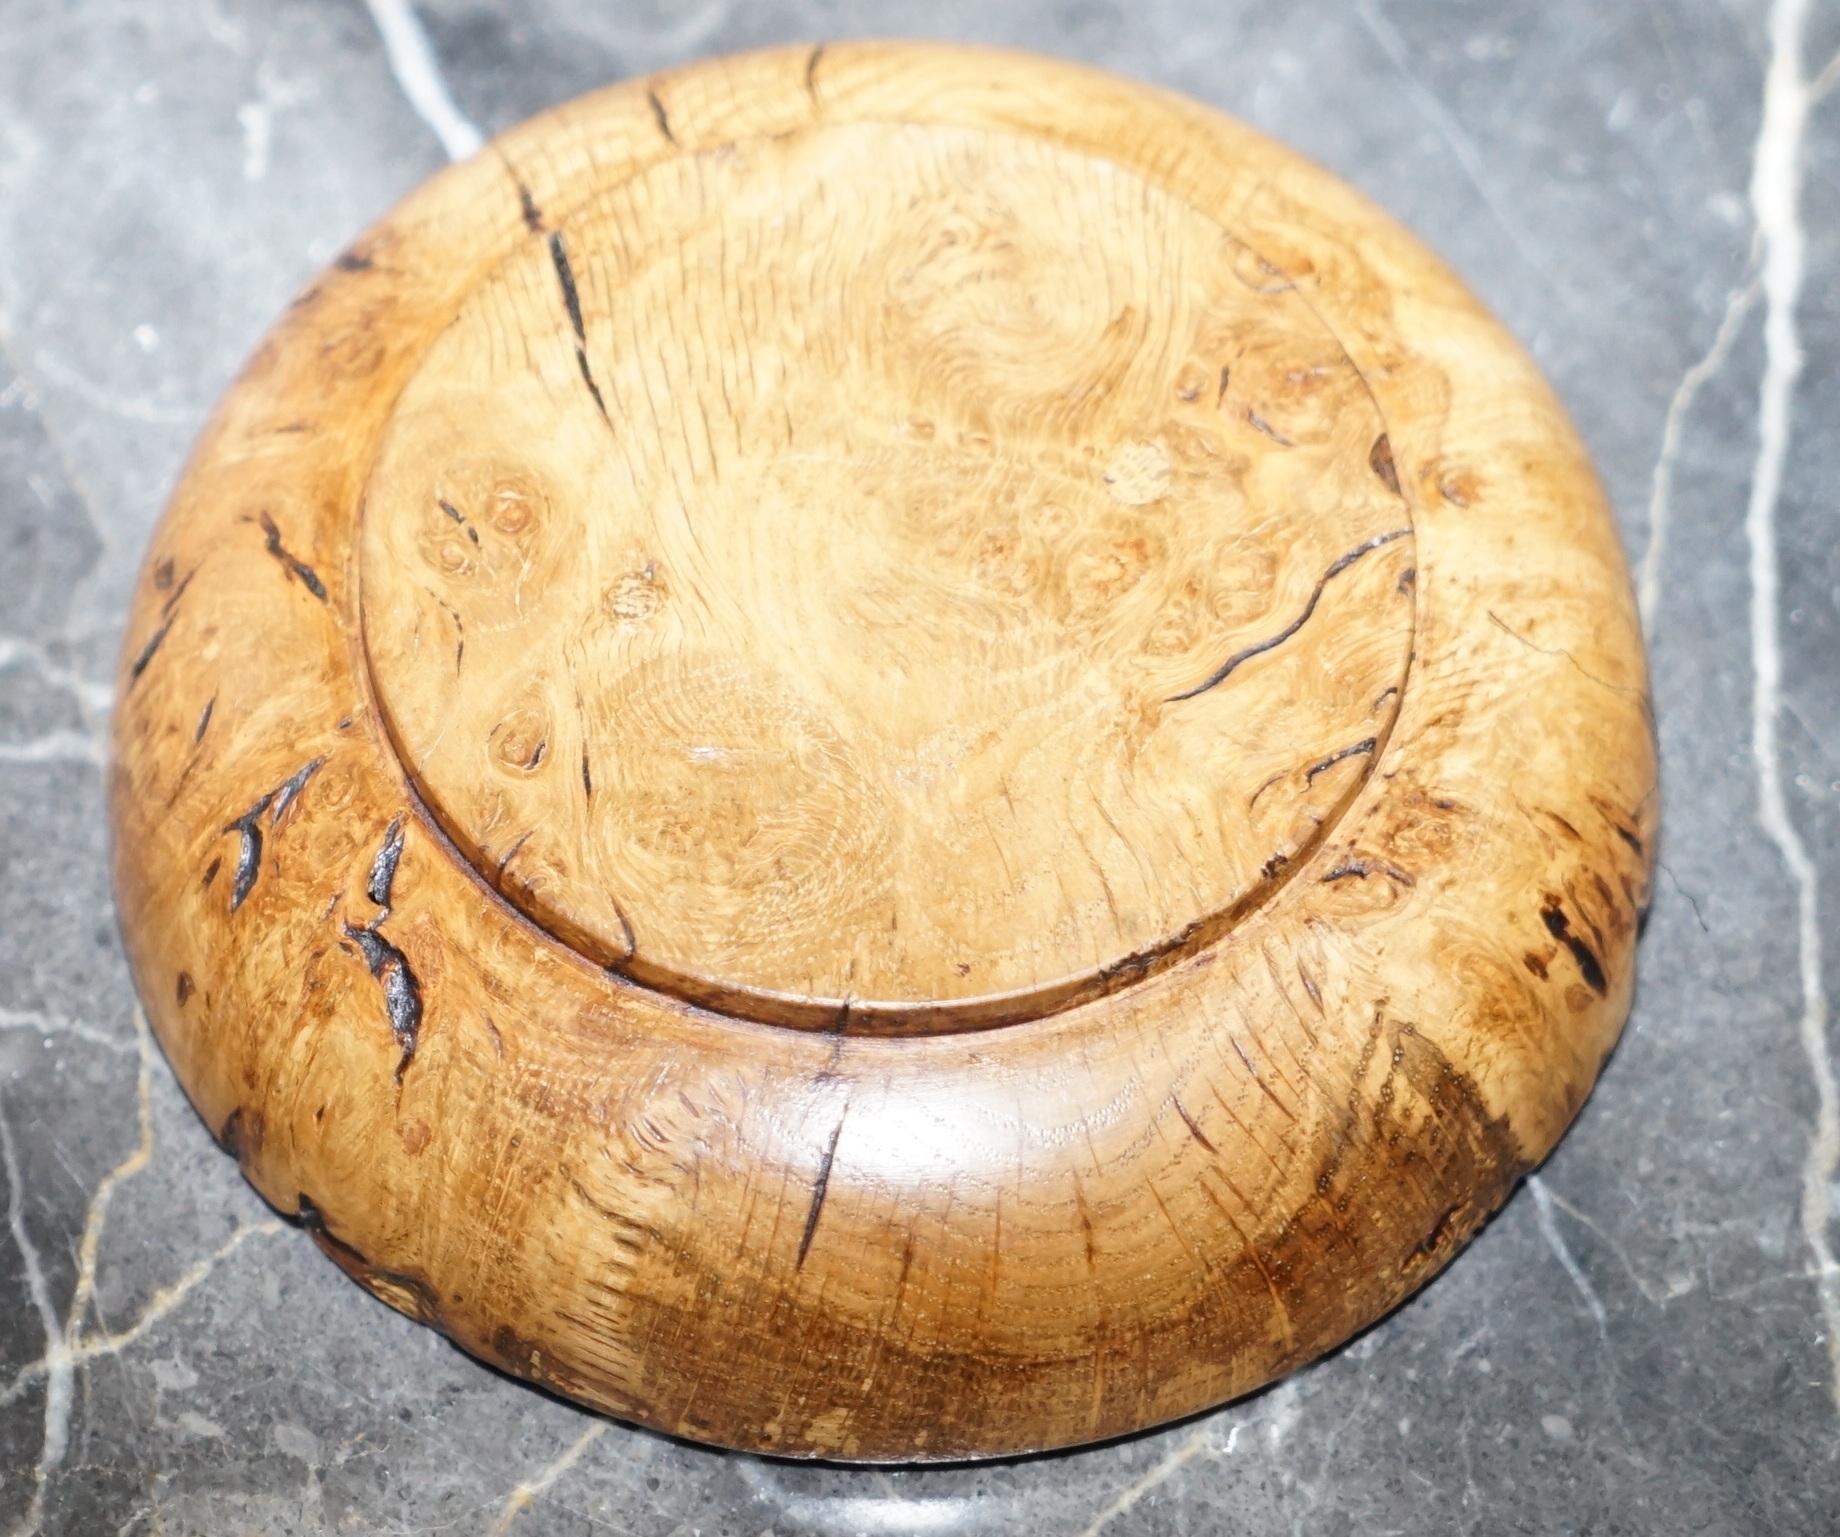 Hand-Crafted Very Rare Early Robert Mouseman Thompson of Kilburn Bowl from Single Oak Burr